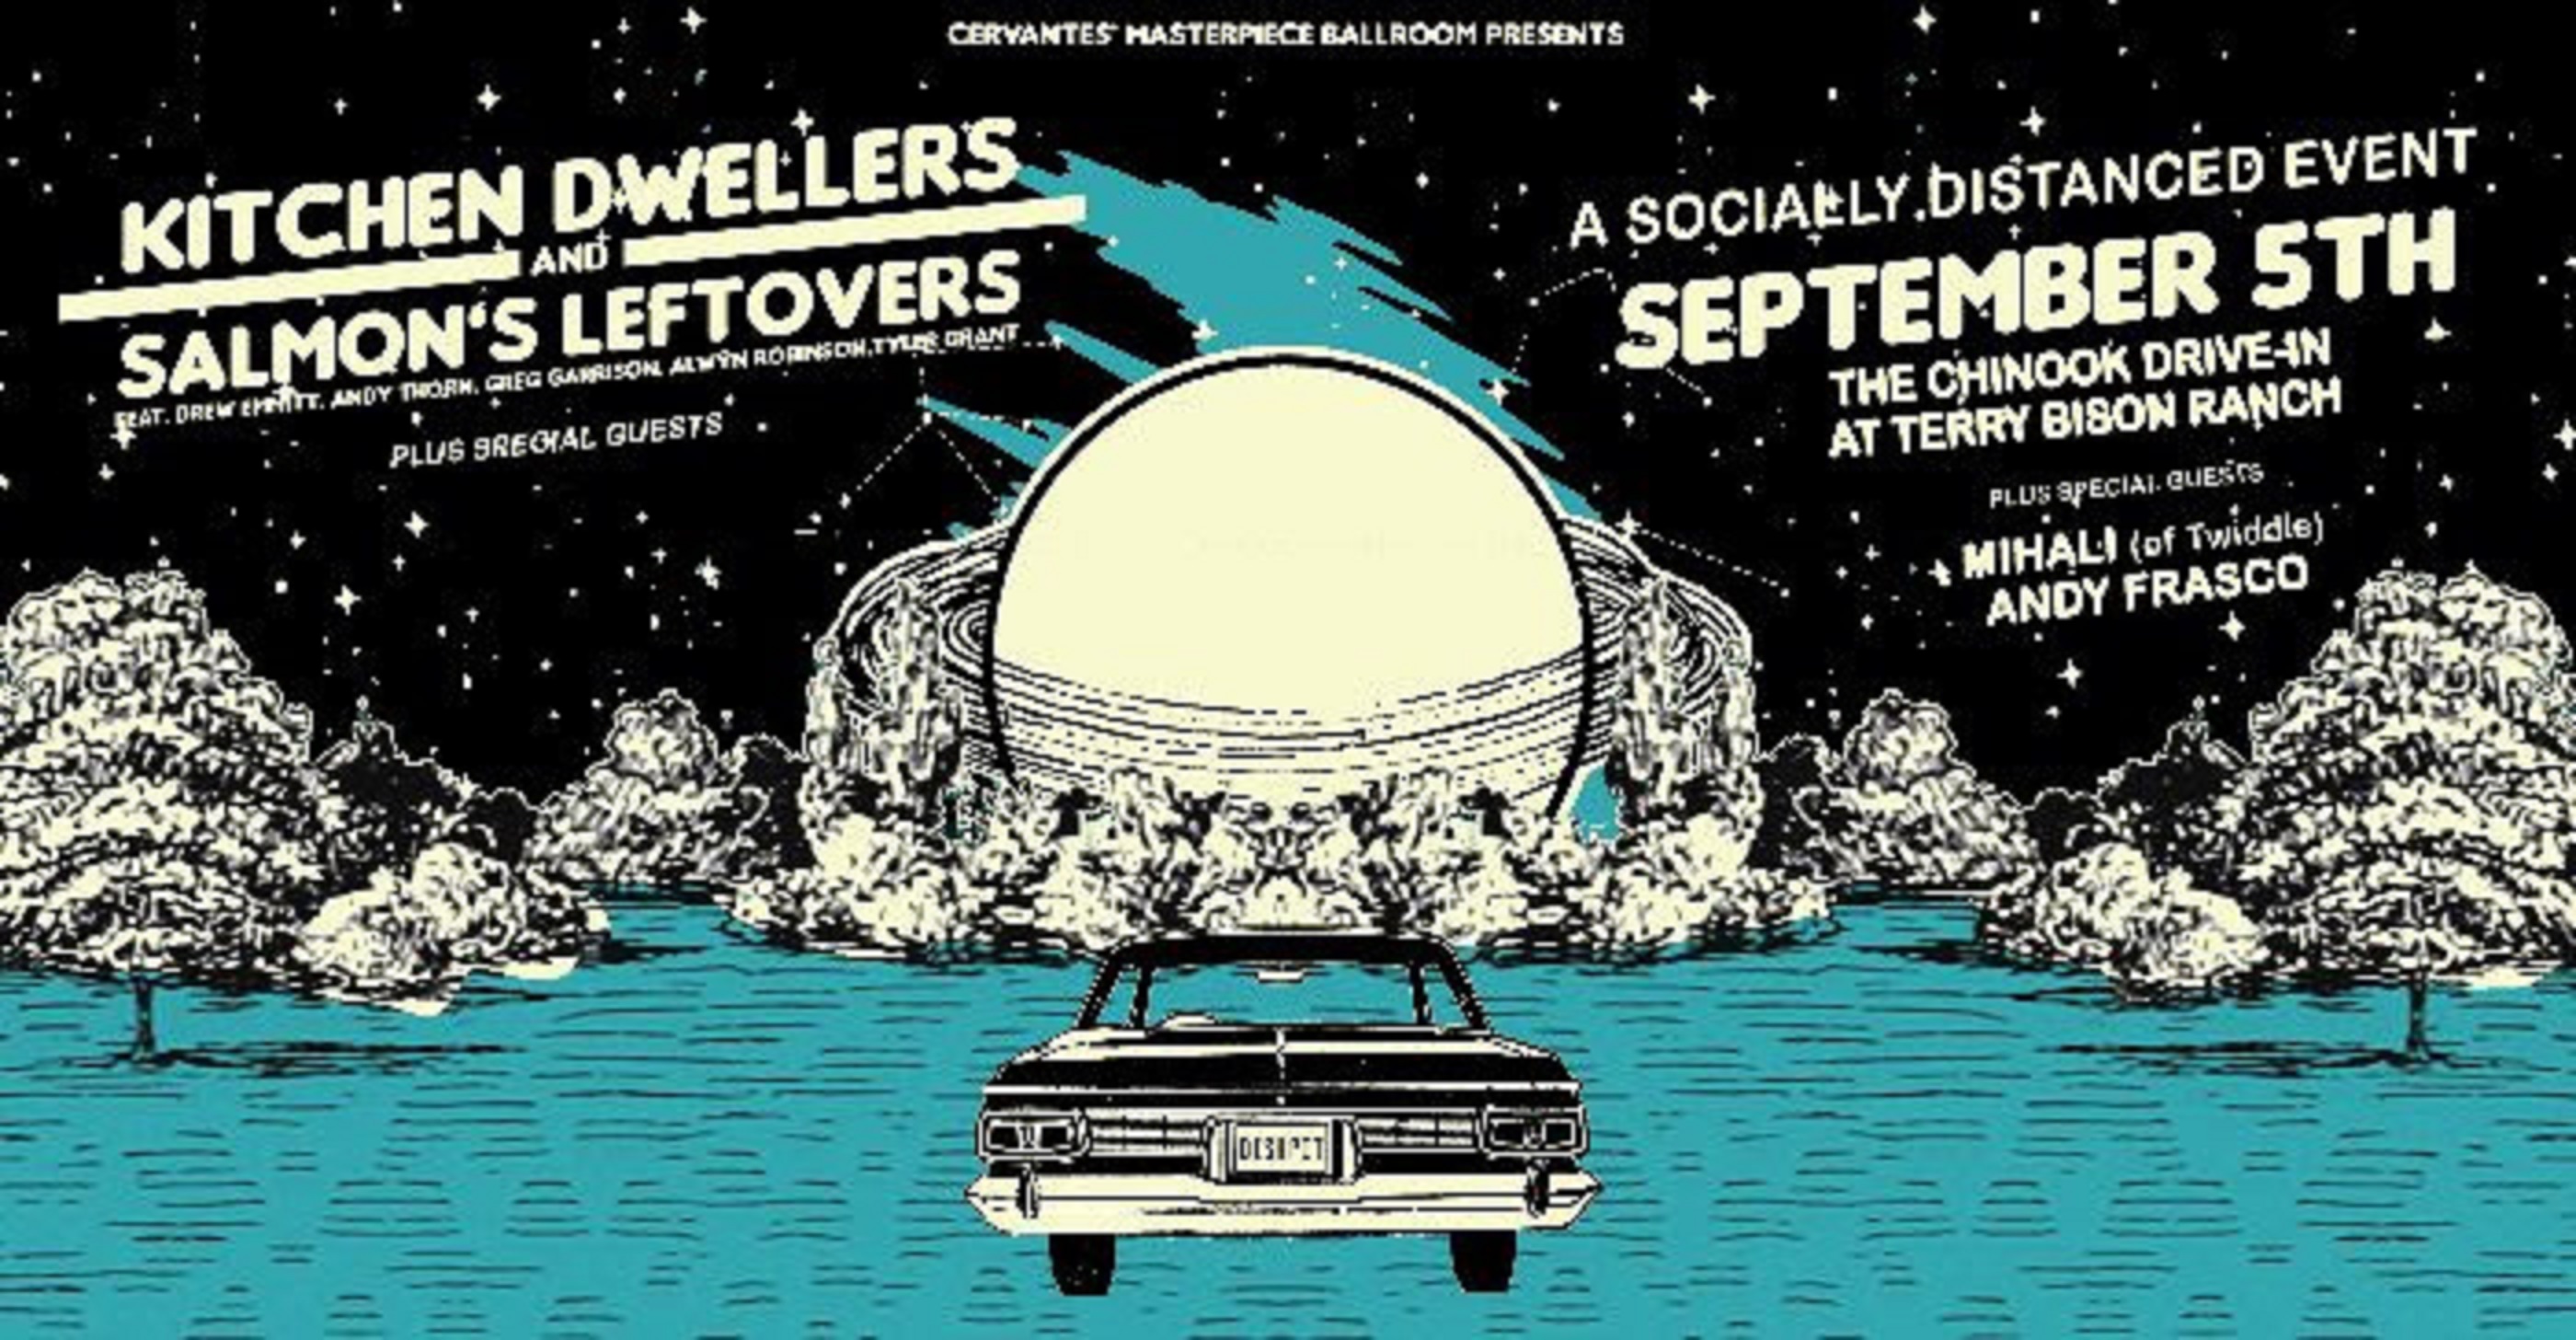 Mihali & Frasco Join Kitchen Dwellers & Salmon's Leftovers at Chinook Drive-In Sept 5th